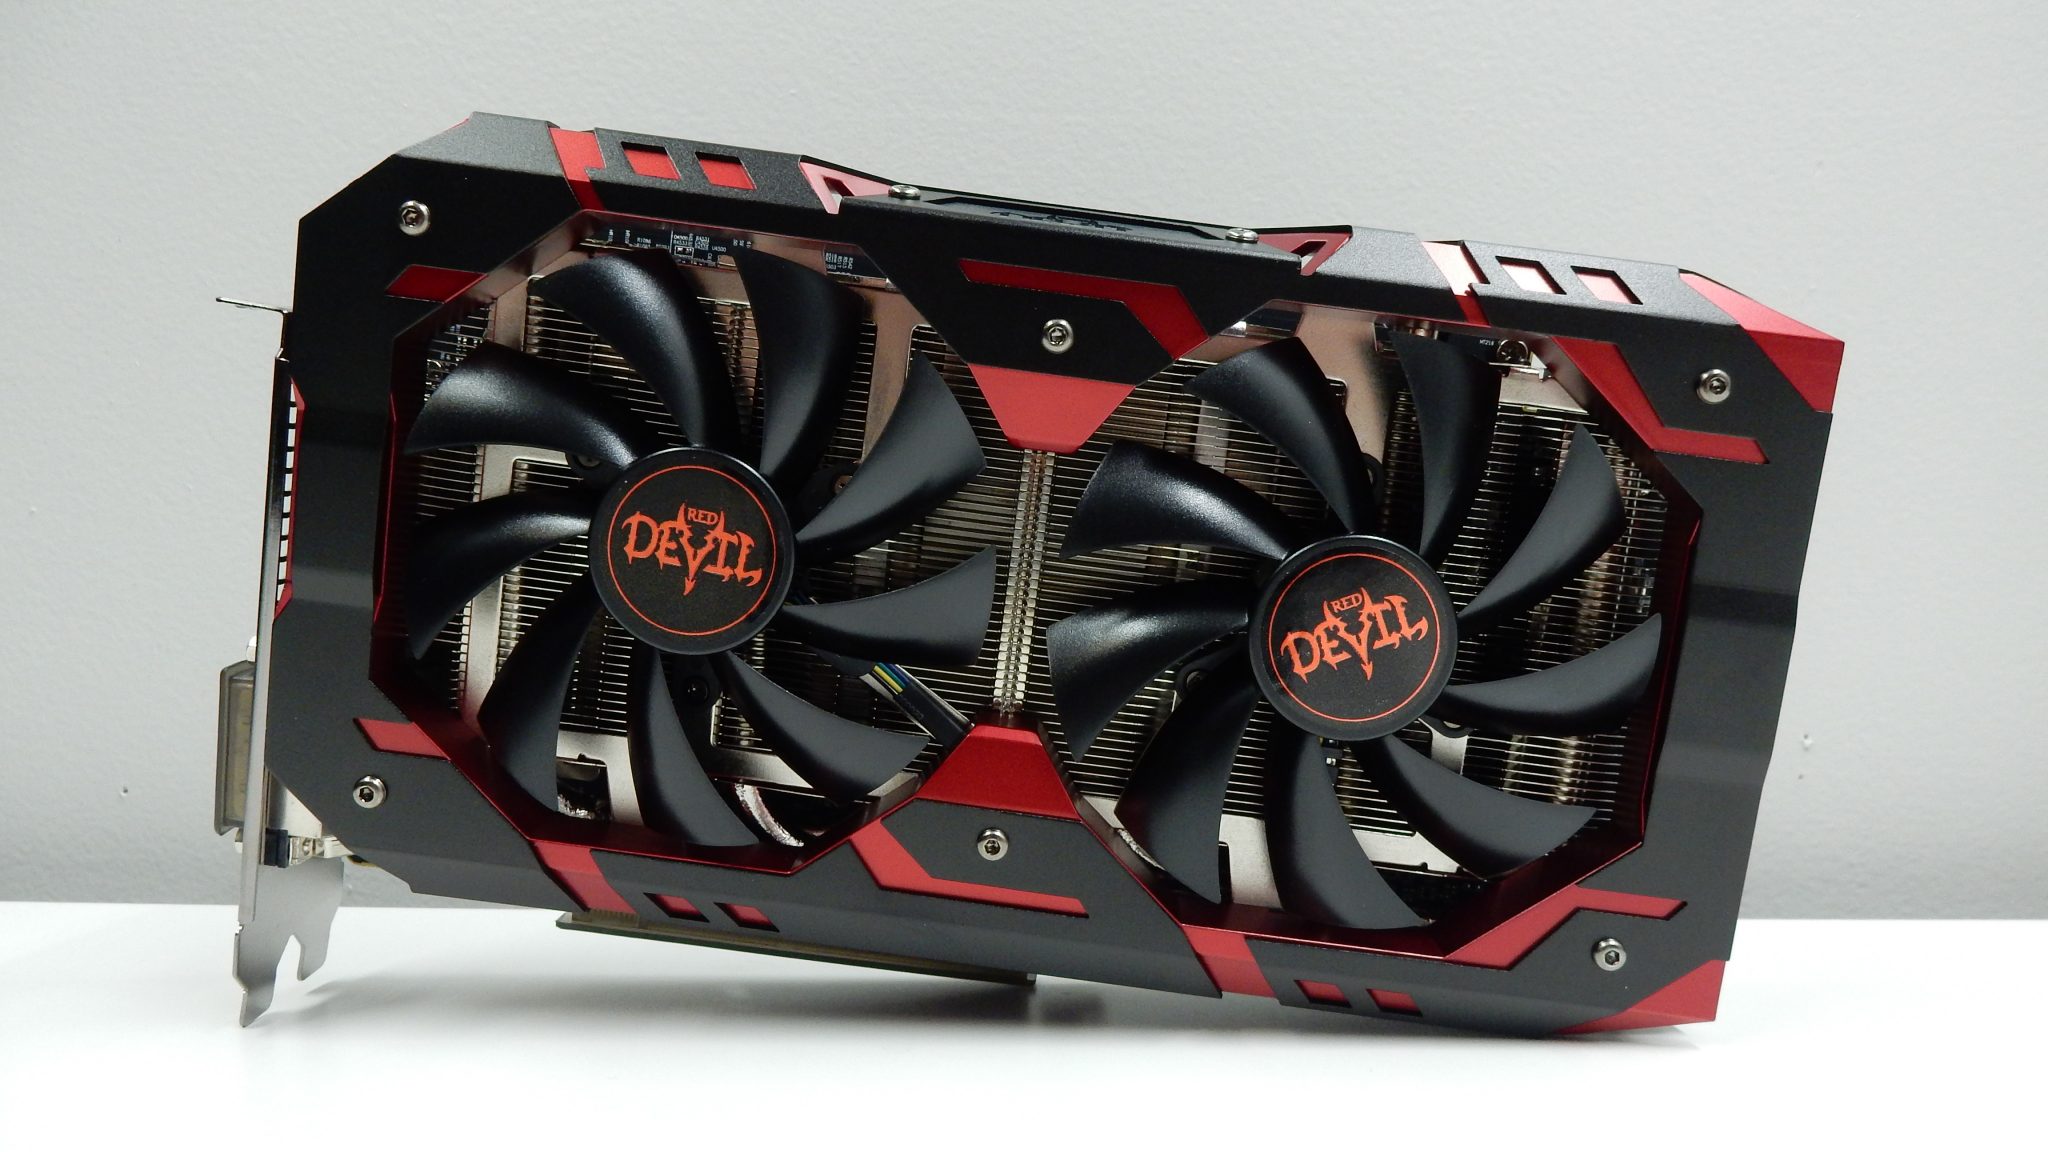 PowerColor Red Devil Radeon RX 580 8GB GDDR5 Review - Page 2 of 5 